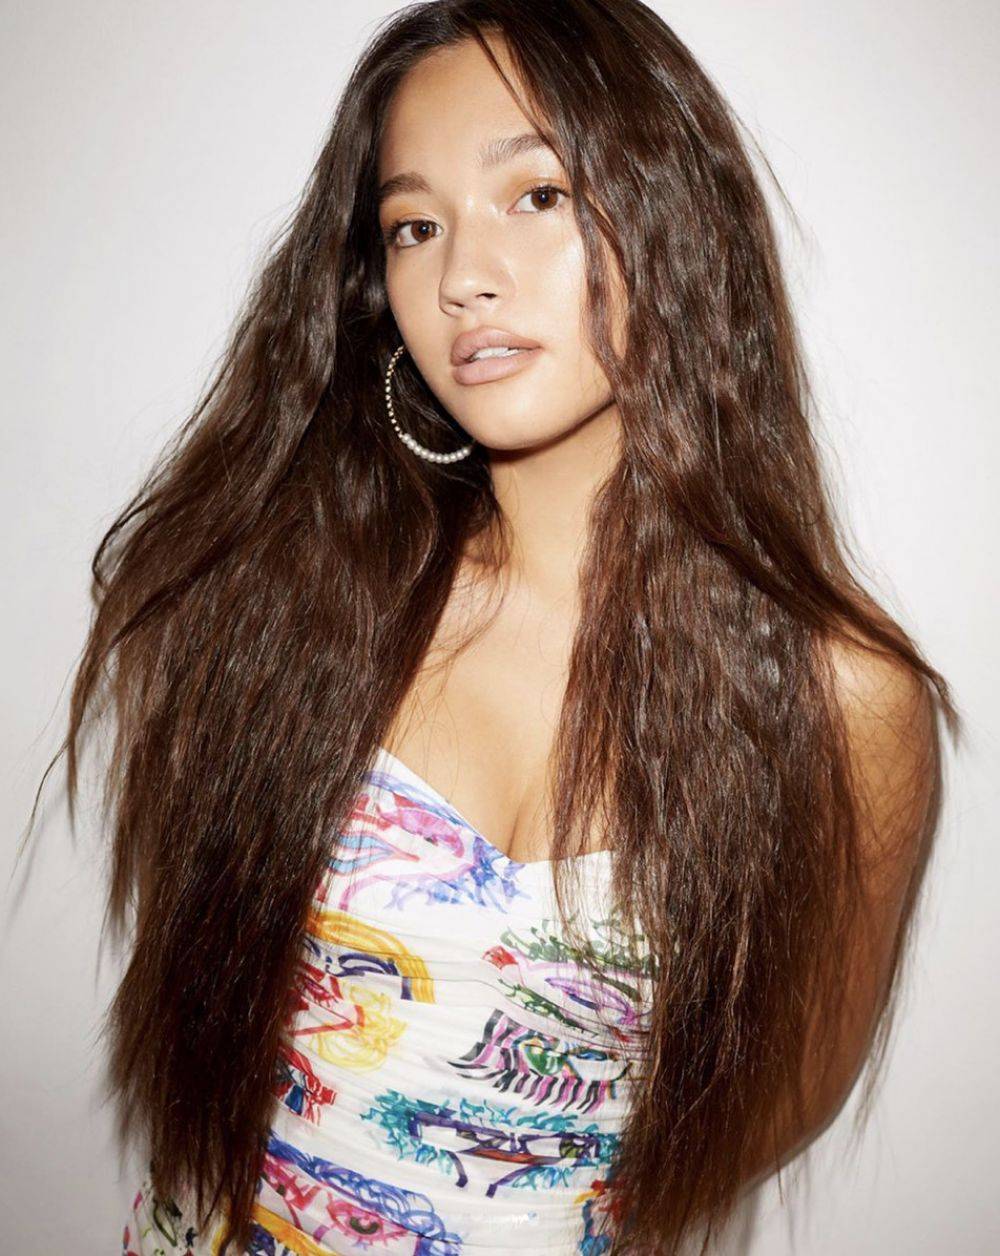 Lily Chee Photoshoot for The Industry Model Management Portfolio, 2020 ...